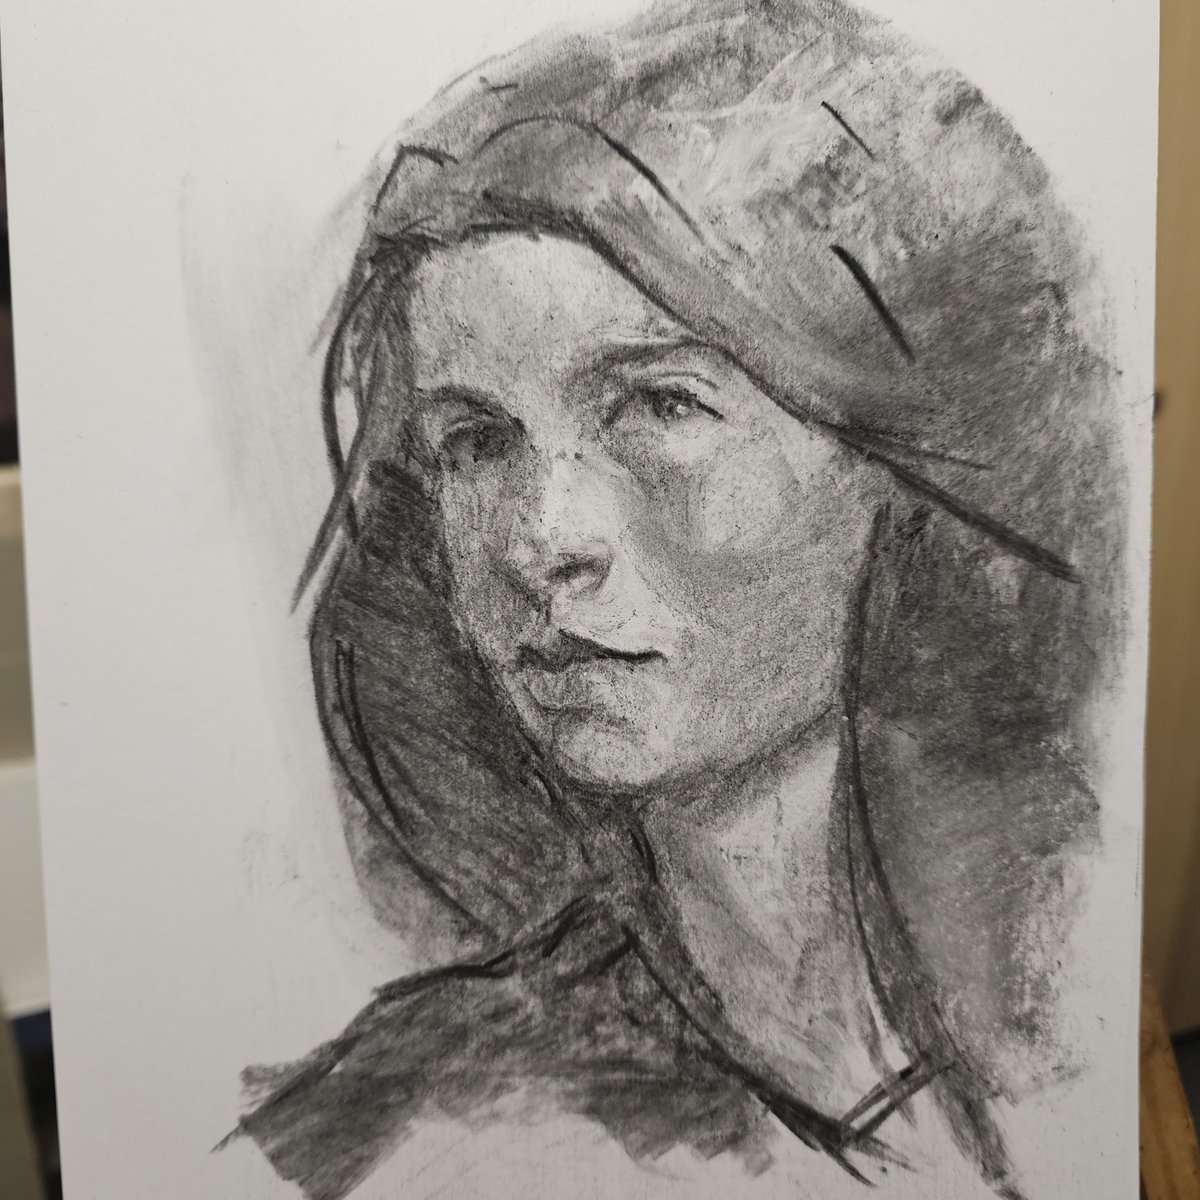 Portrait study in charcoal

Drawing faces
Portrait artist 
Portraits in charcoal
Artists on Instagram
#art #artist #fineart #portraitartist #charcoal #charcoalartist